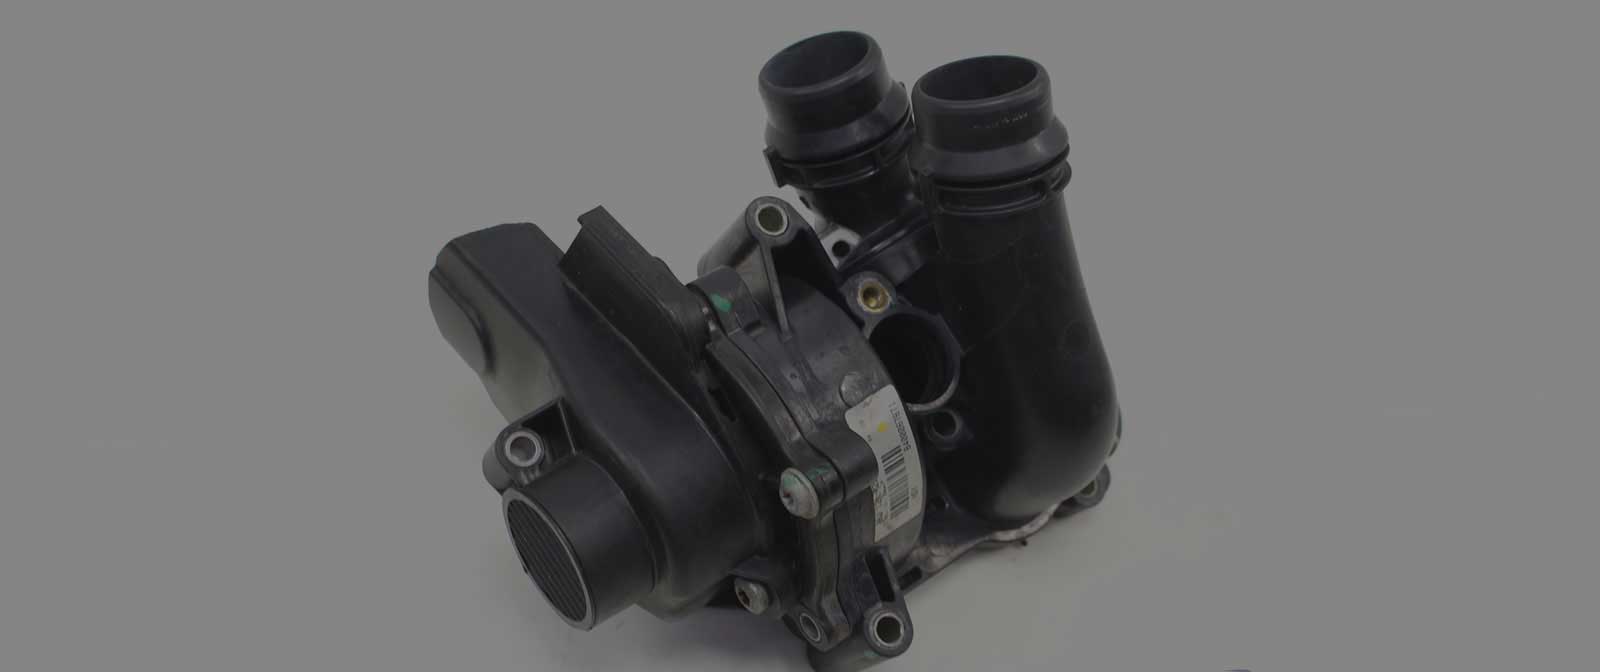 Audi water pump for sale